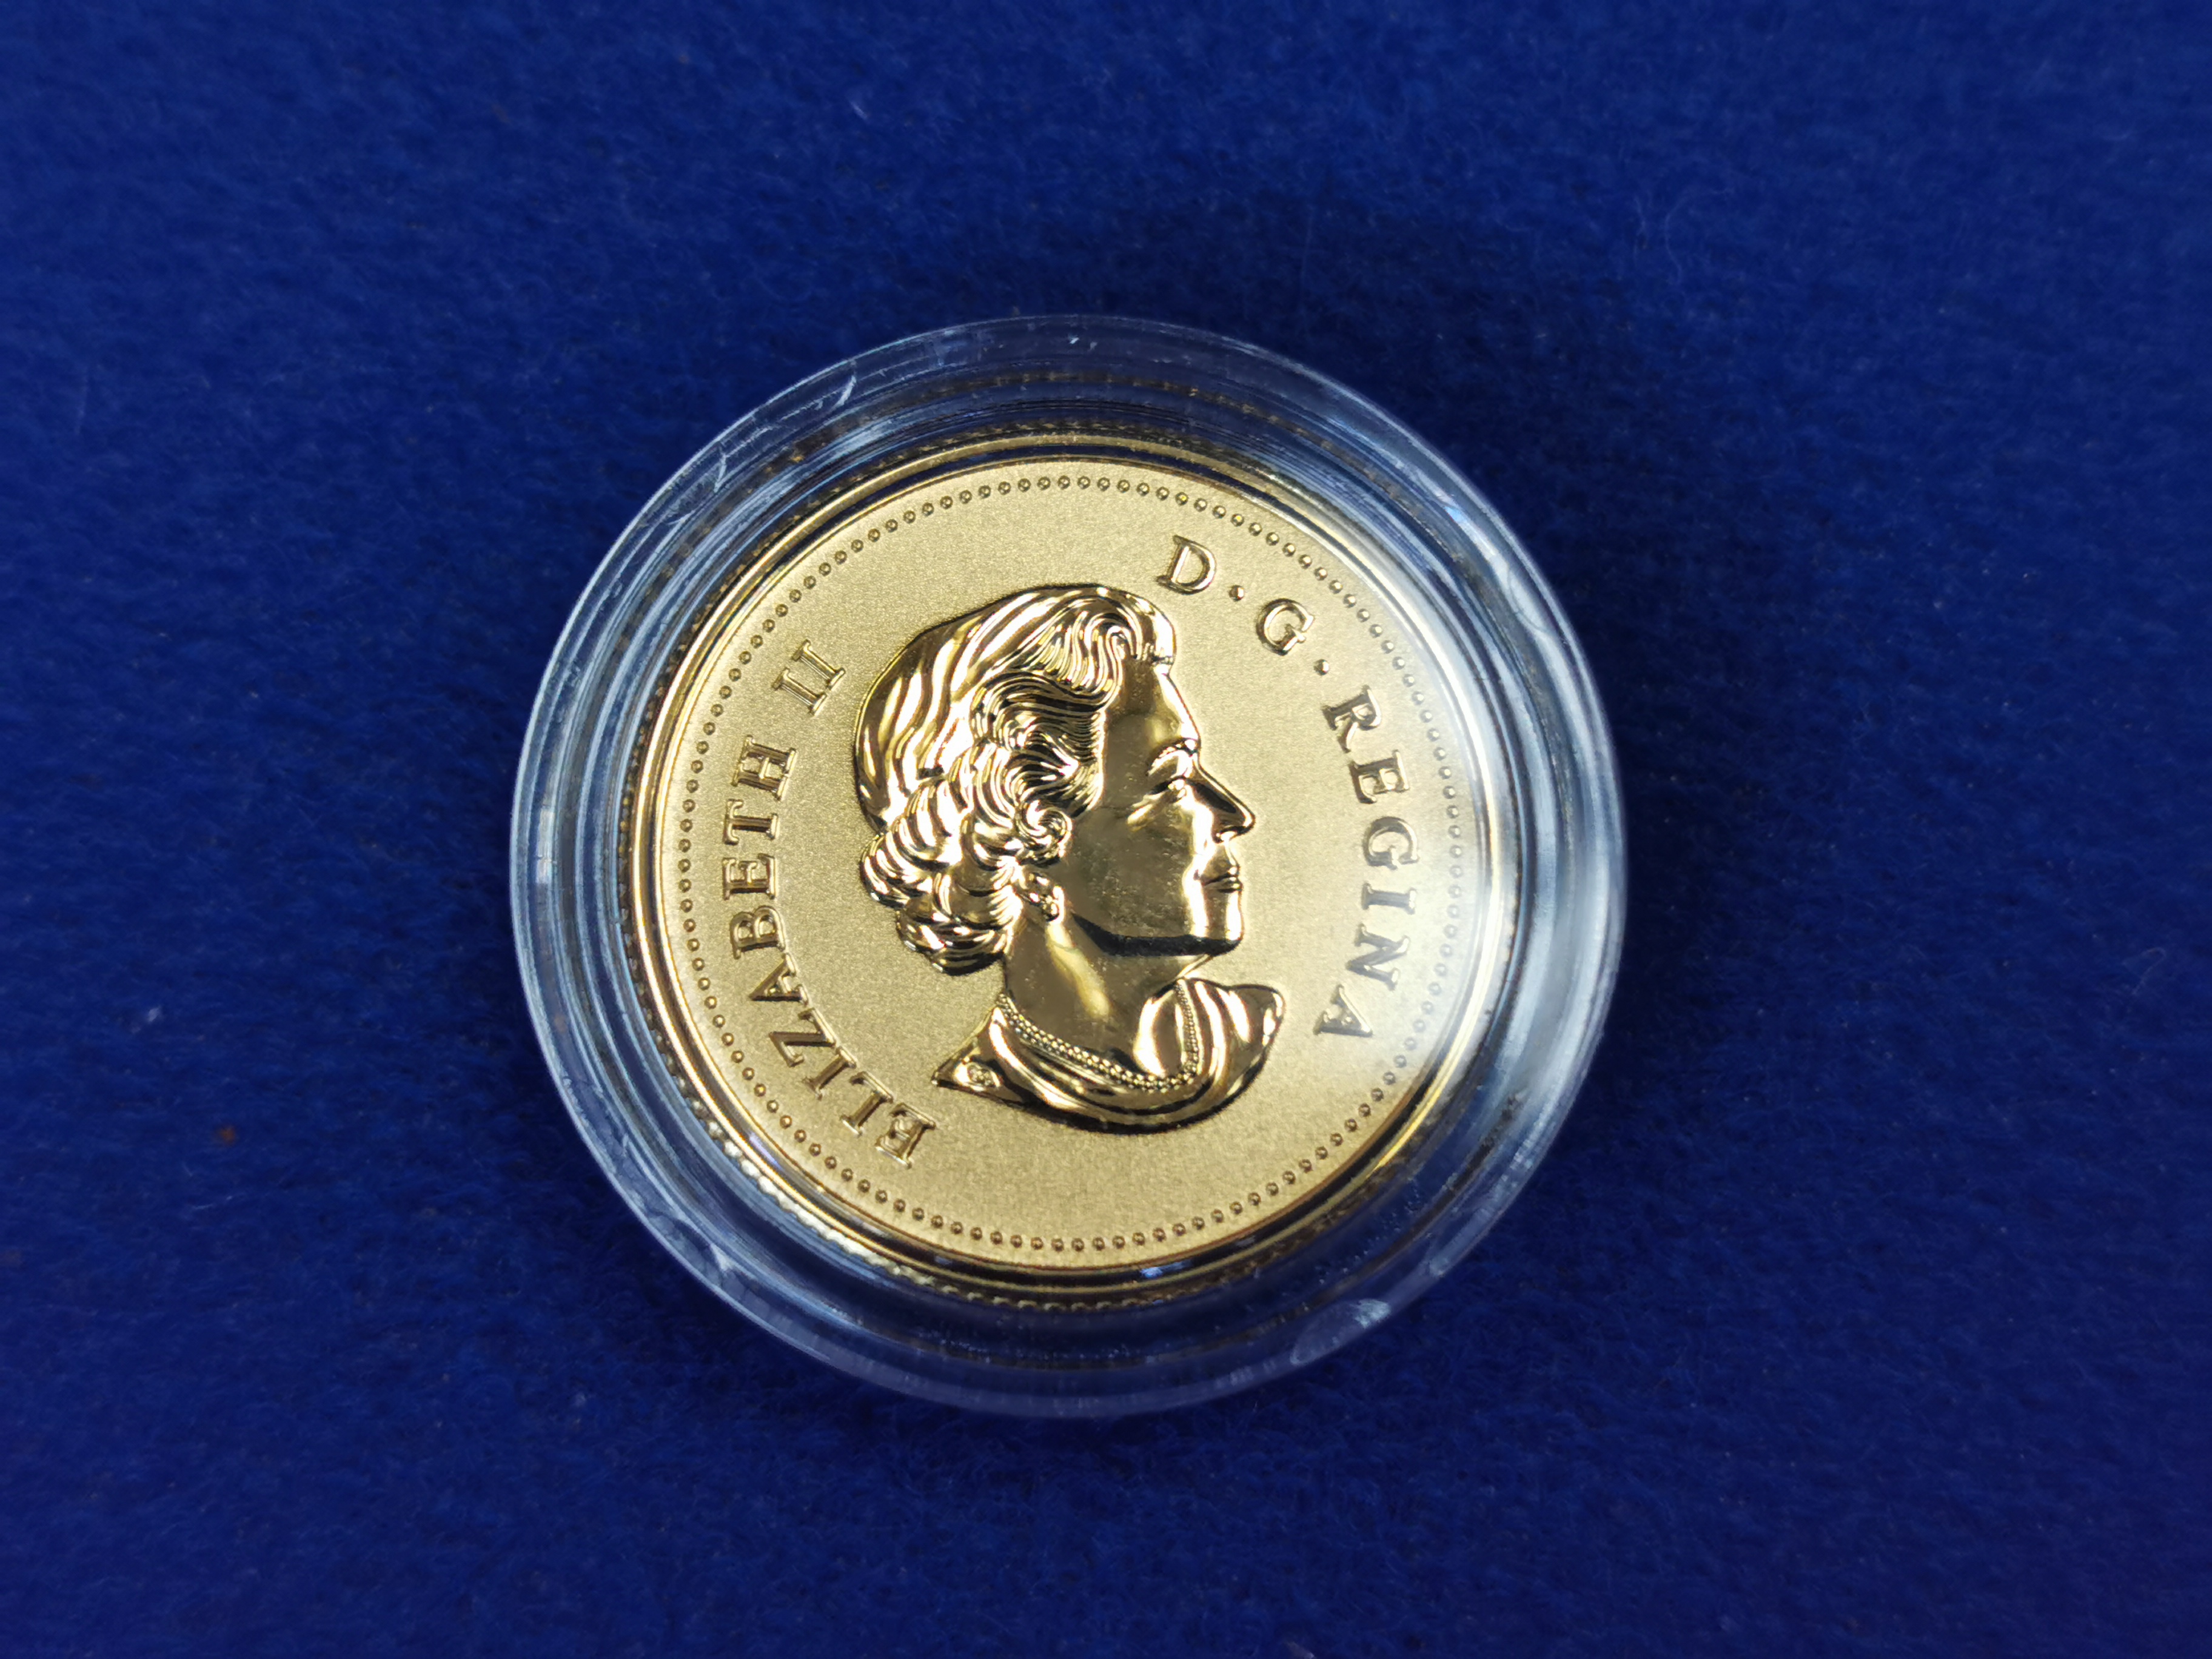 Boxed Royal Canadian Mint 10 Dollar 2016 Gold Coin - 8g - Image 2 of 3